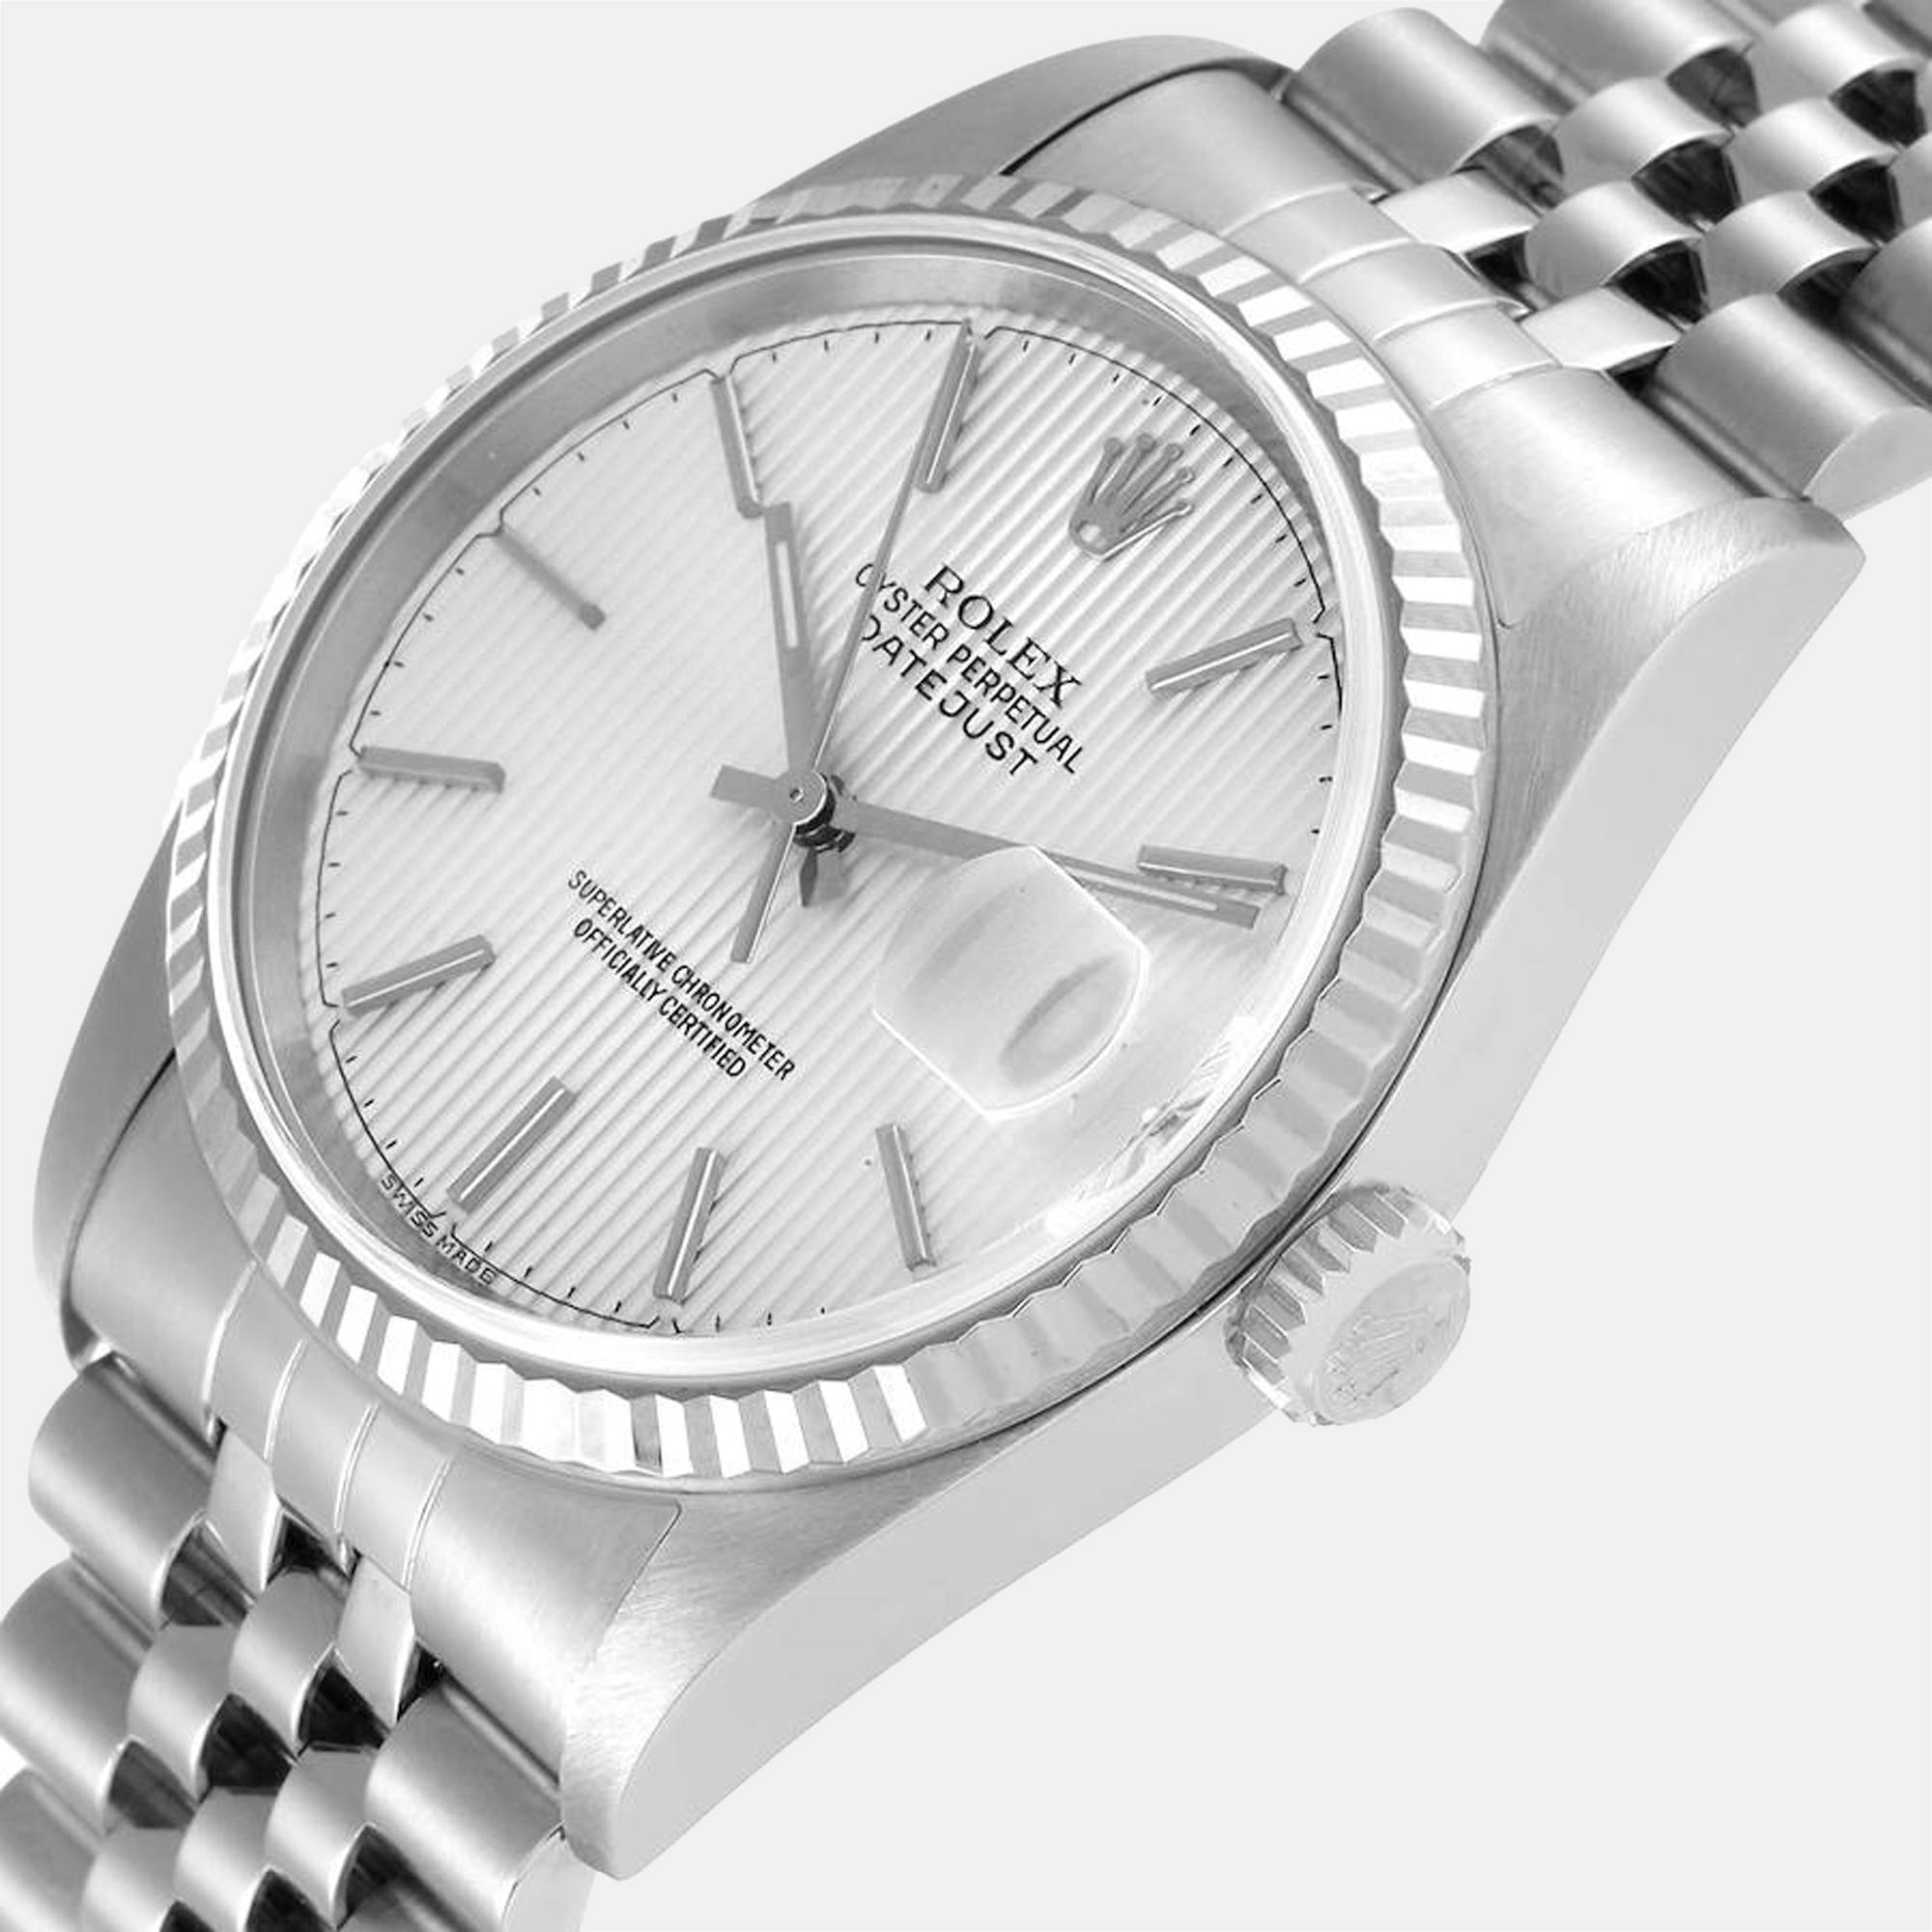 

Rolex Silver 18k White Gold And Stainless Steel Datejust 16234 Automatic Men's Wristwatch 36 mm